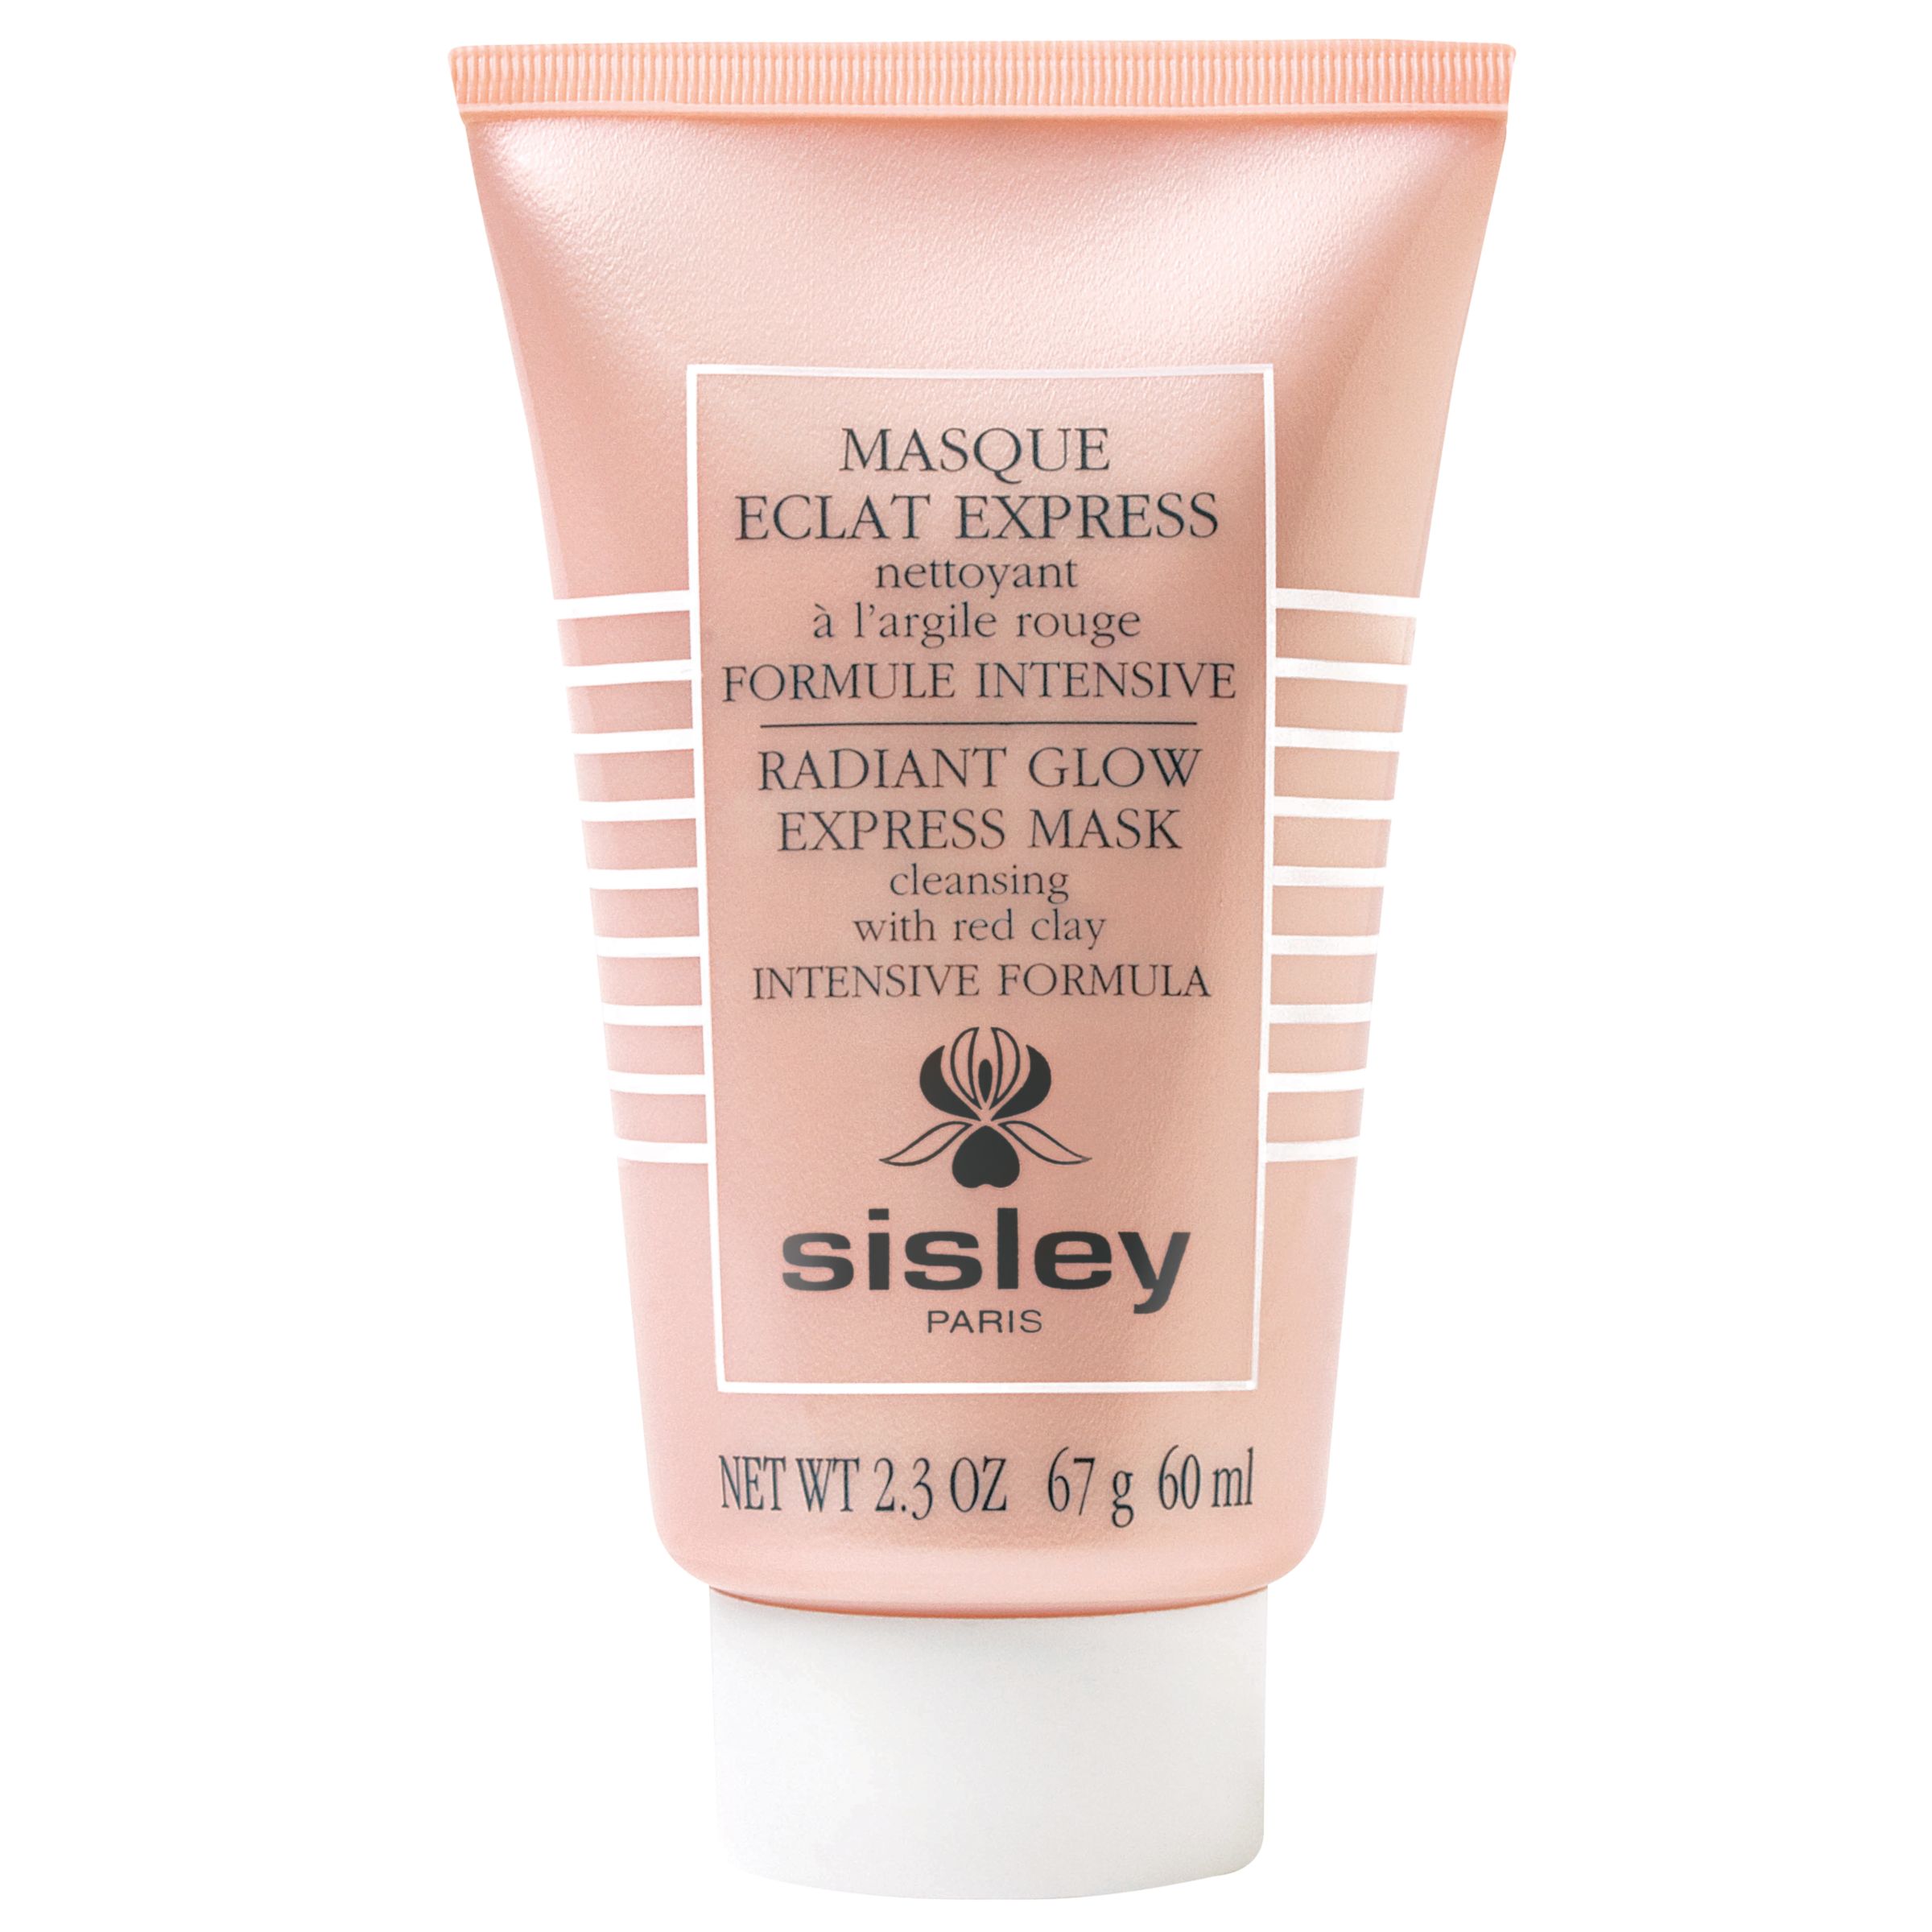 Sisley-Paris Radiant Glow Mask with Red Clay, 60ml 1